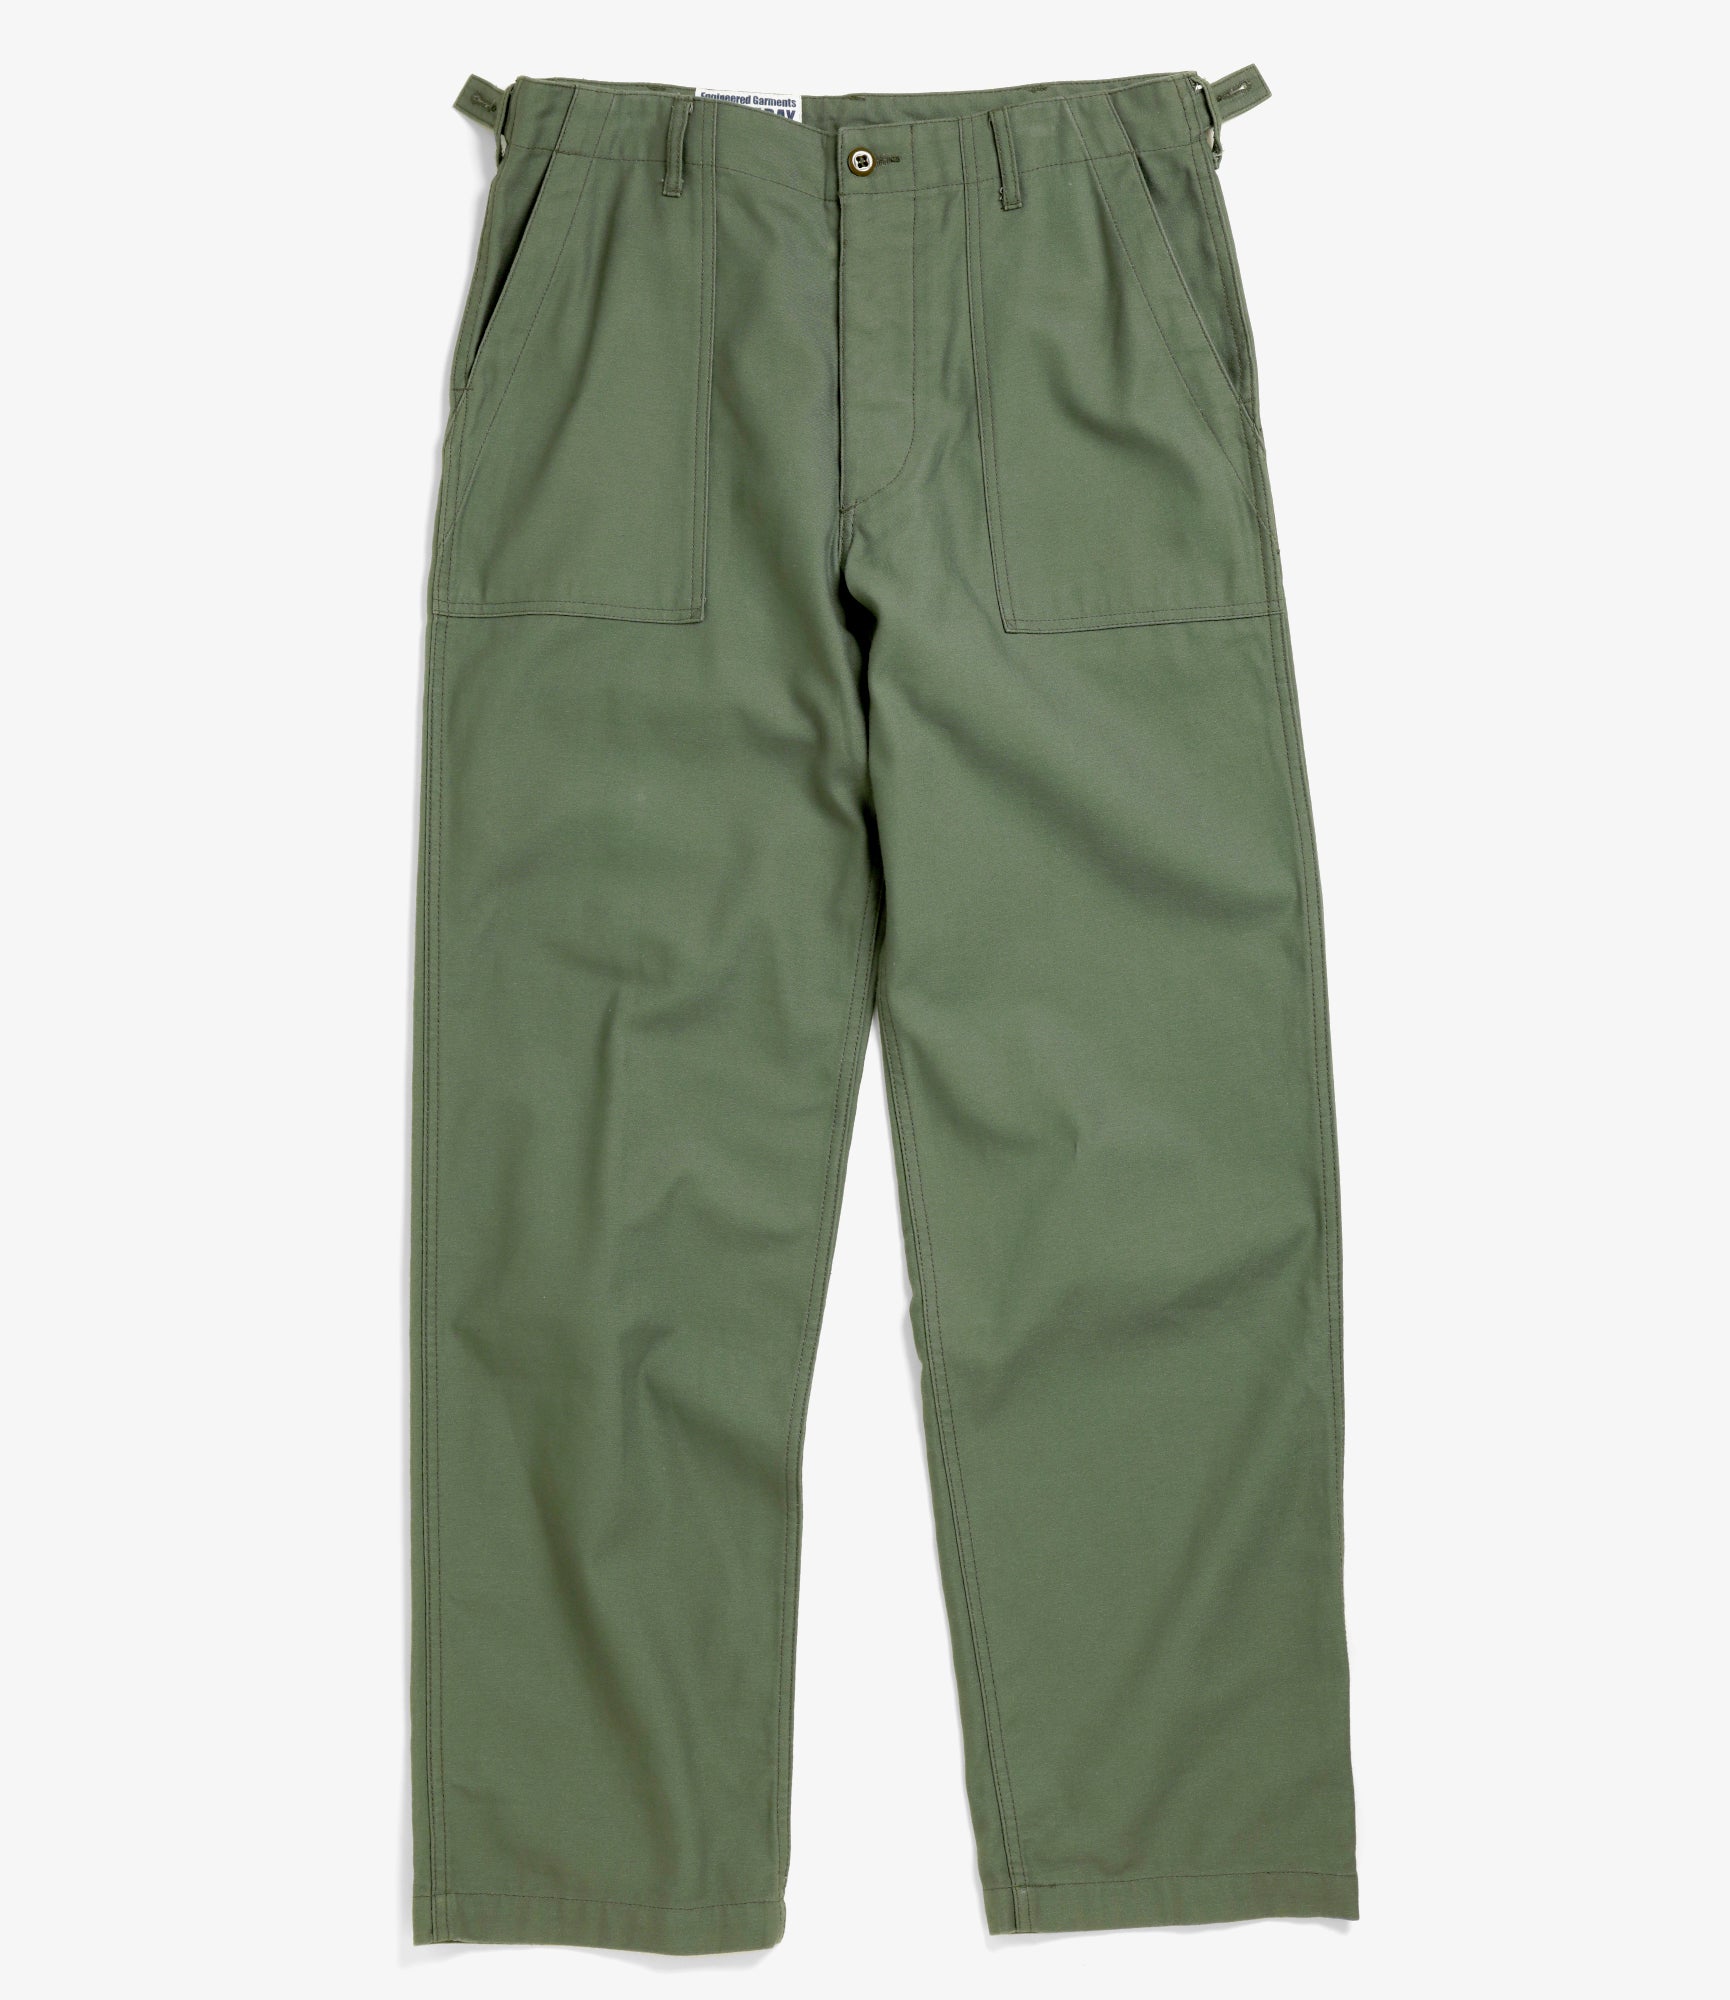 Engineered Garments Workaday Fatigue Pant - Olive Cotton Reversed Sateen